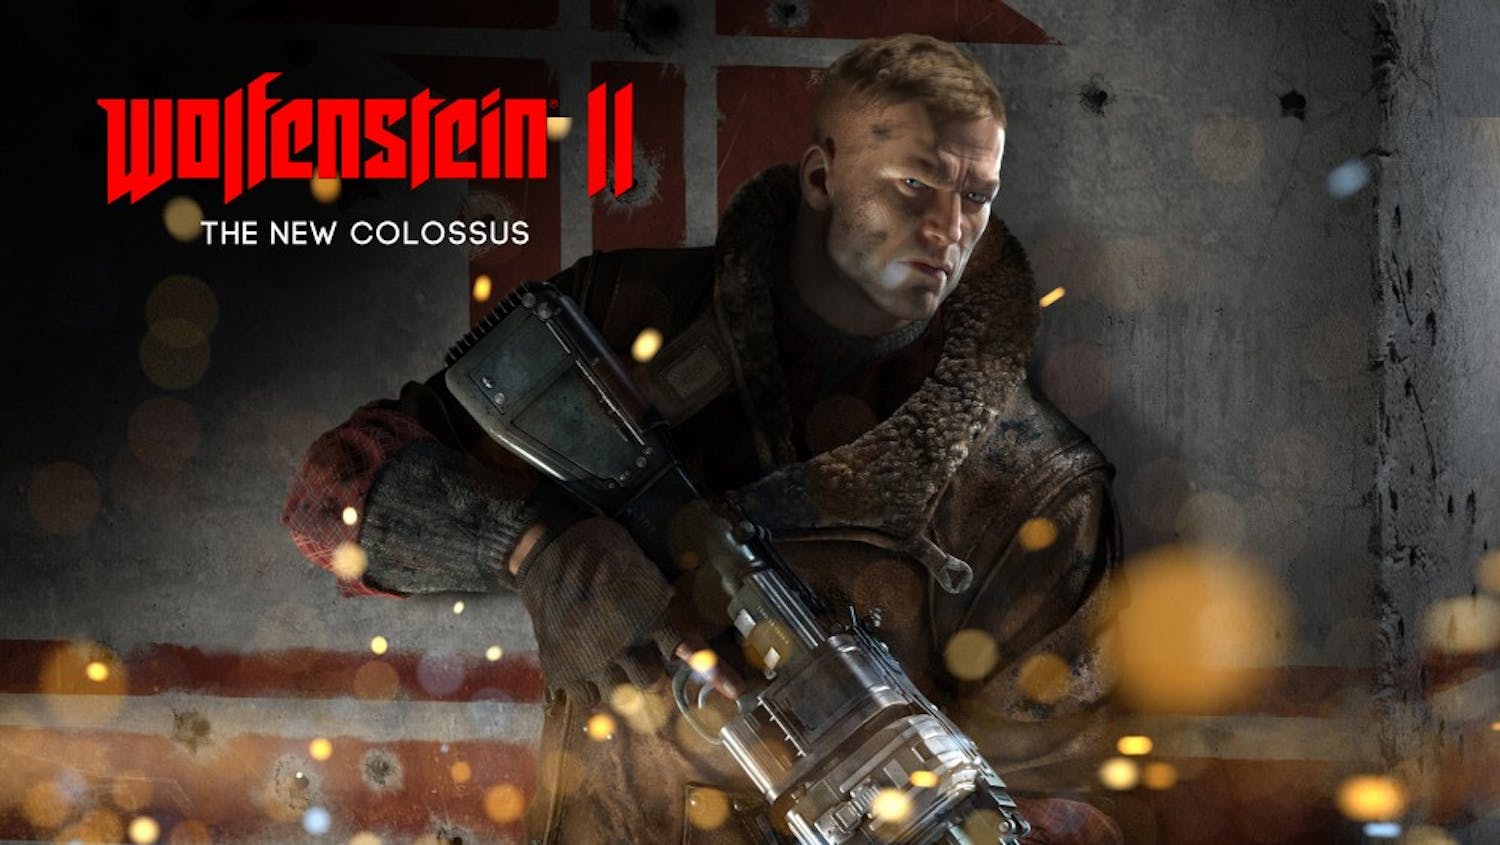 “Wolfenstein II: The New Colossus” expands on the original, crafting a worthy sequel to "The New Order."